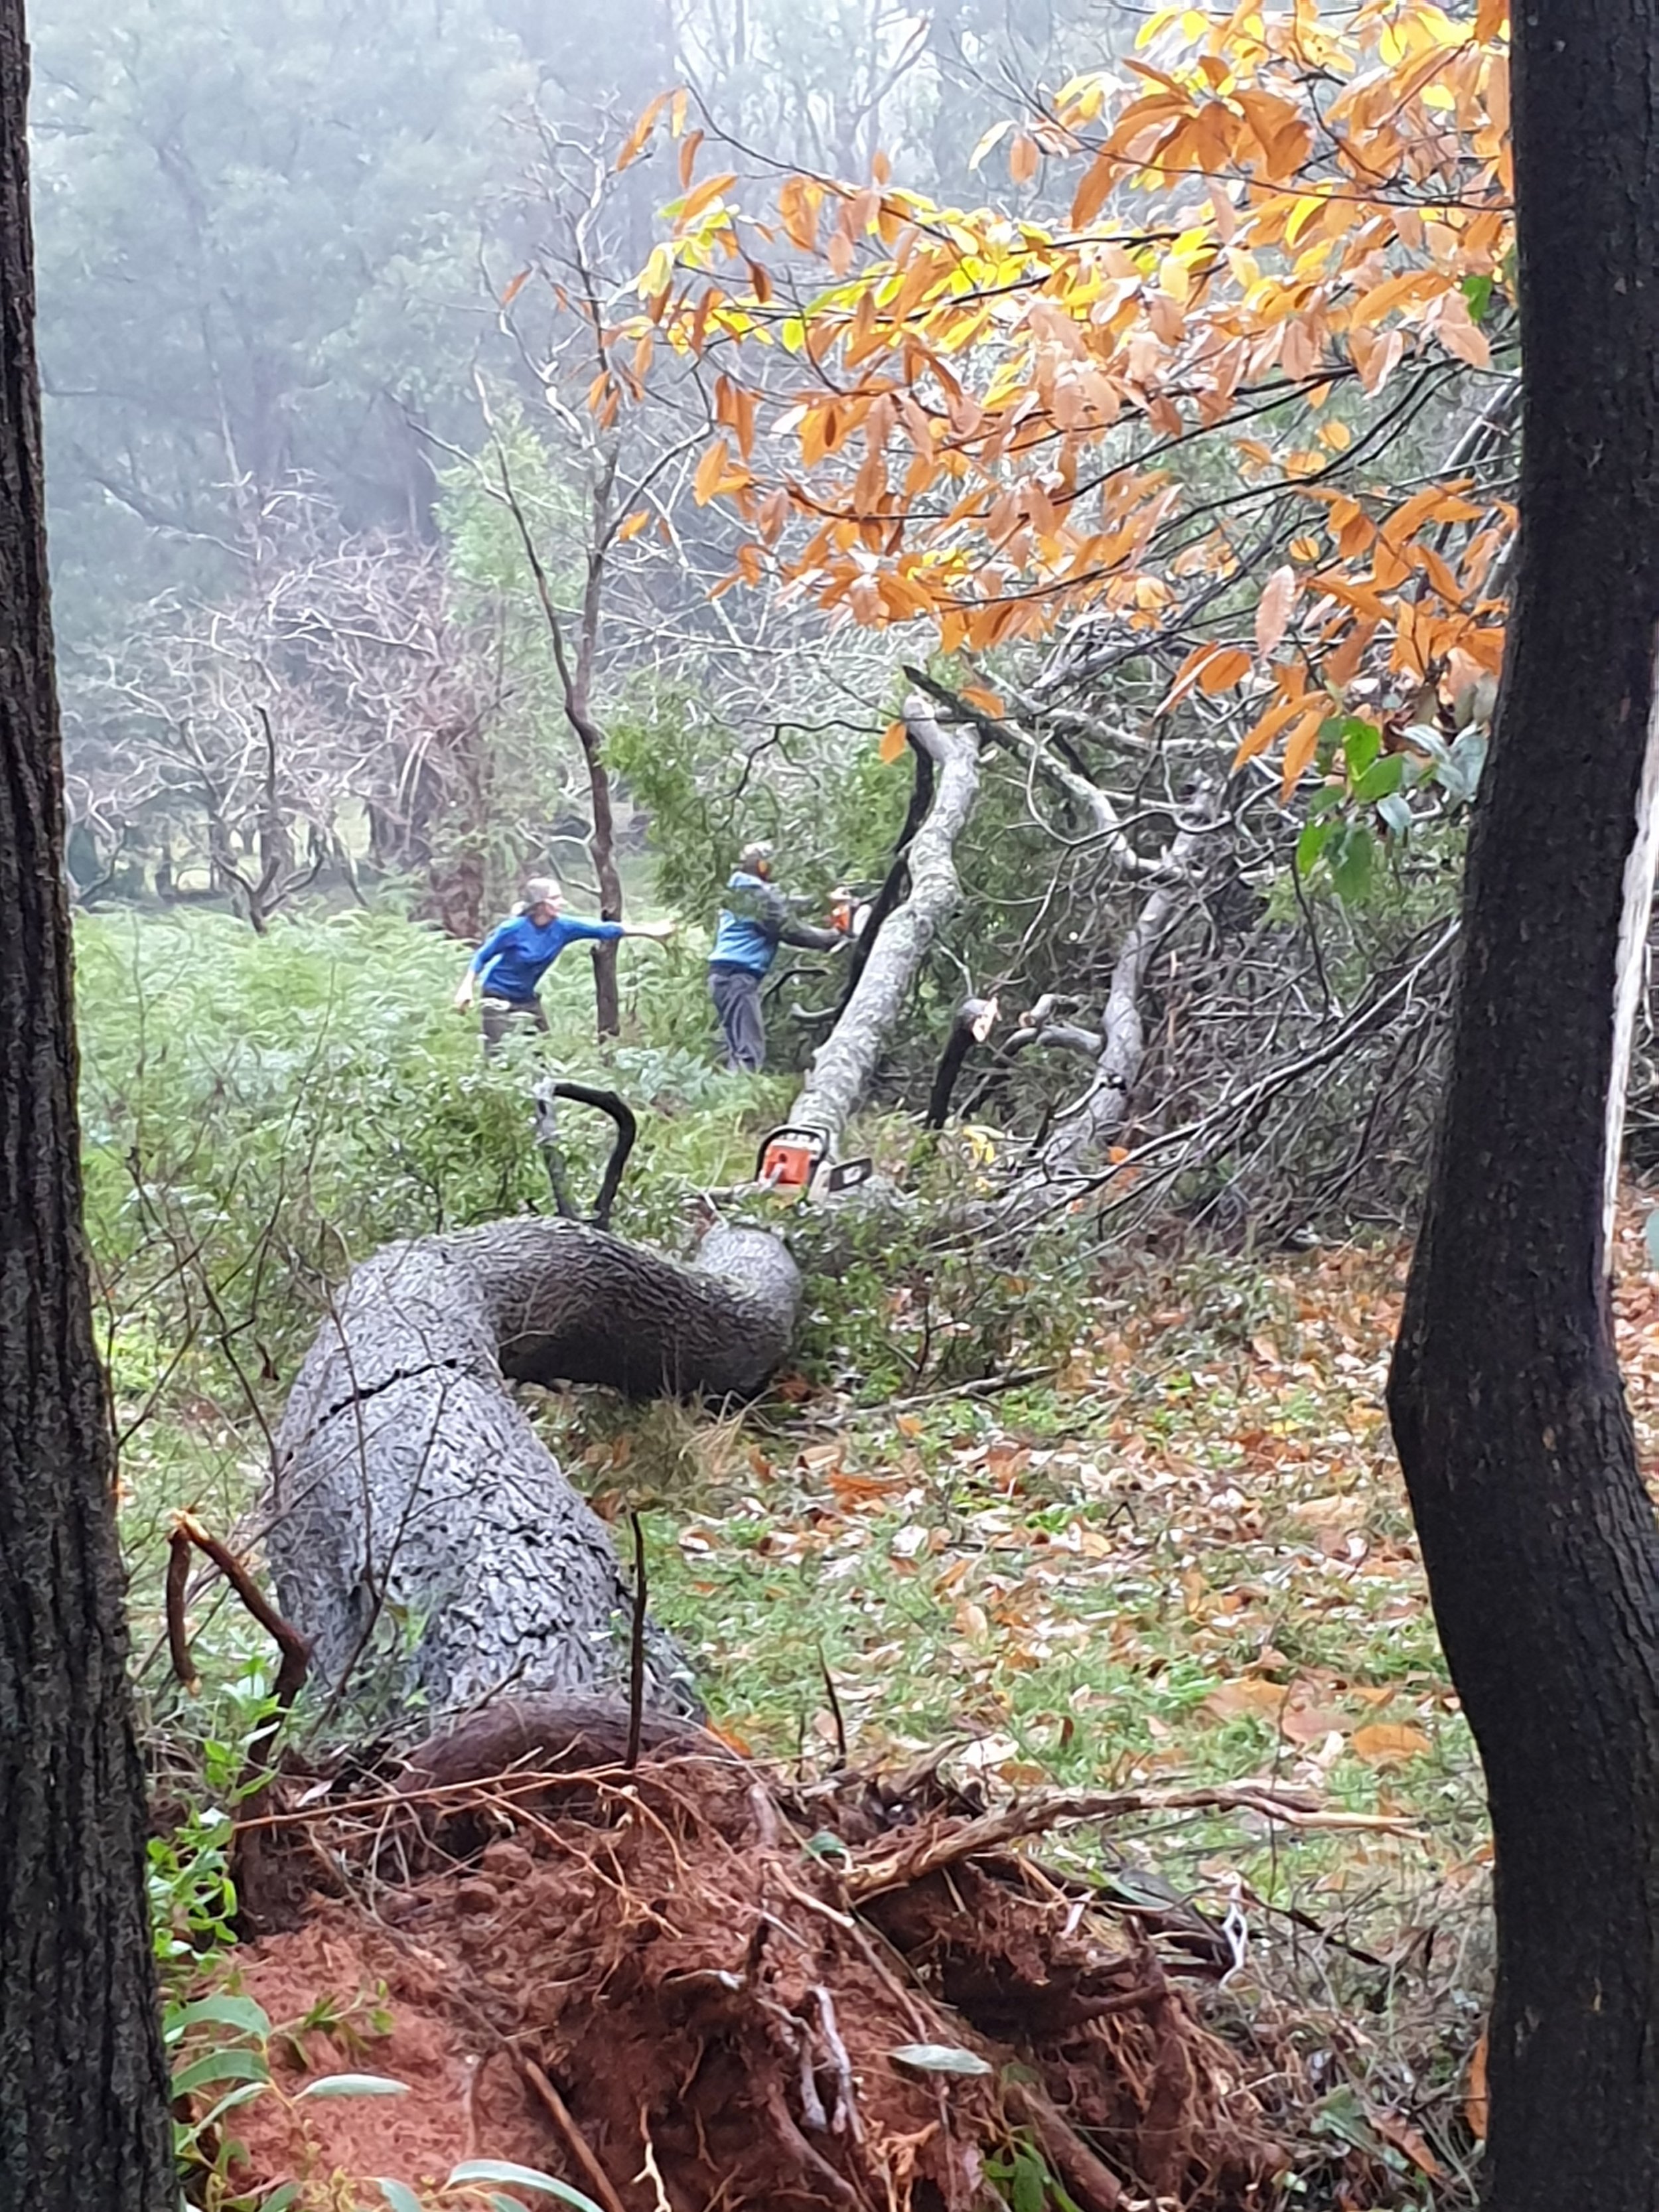 Fallen tree being cut by man with chainsaw